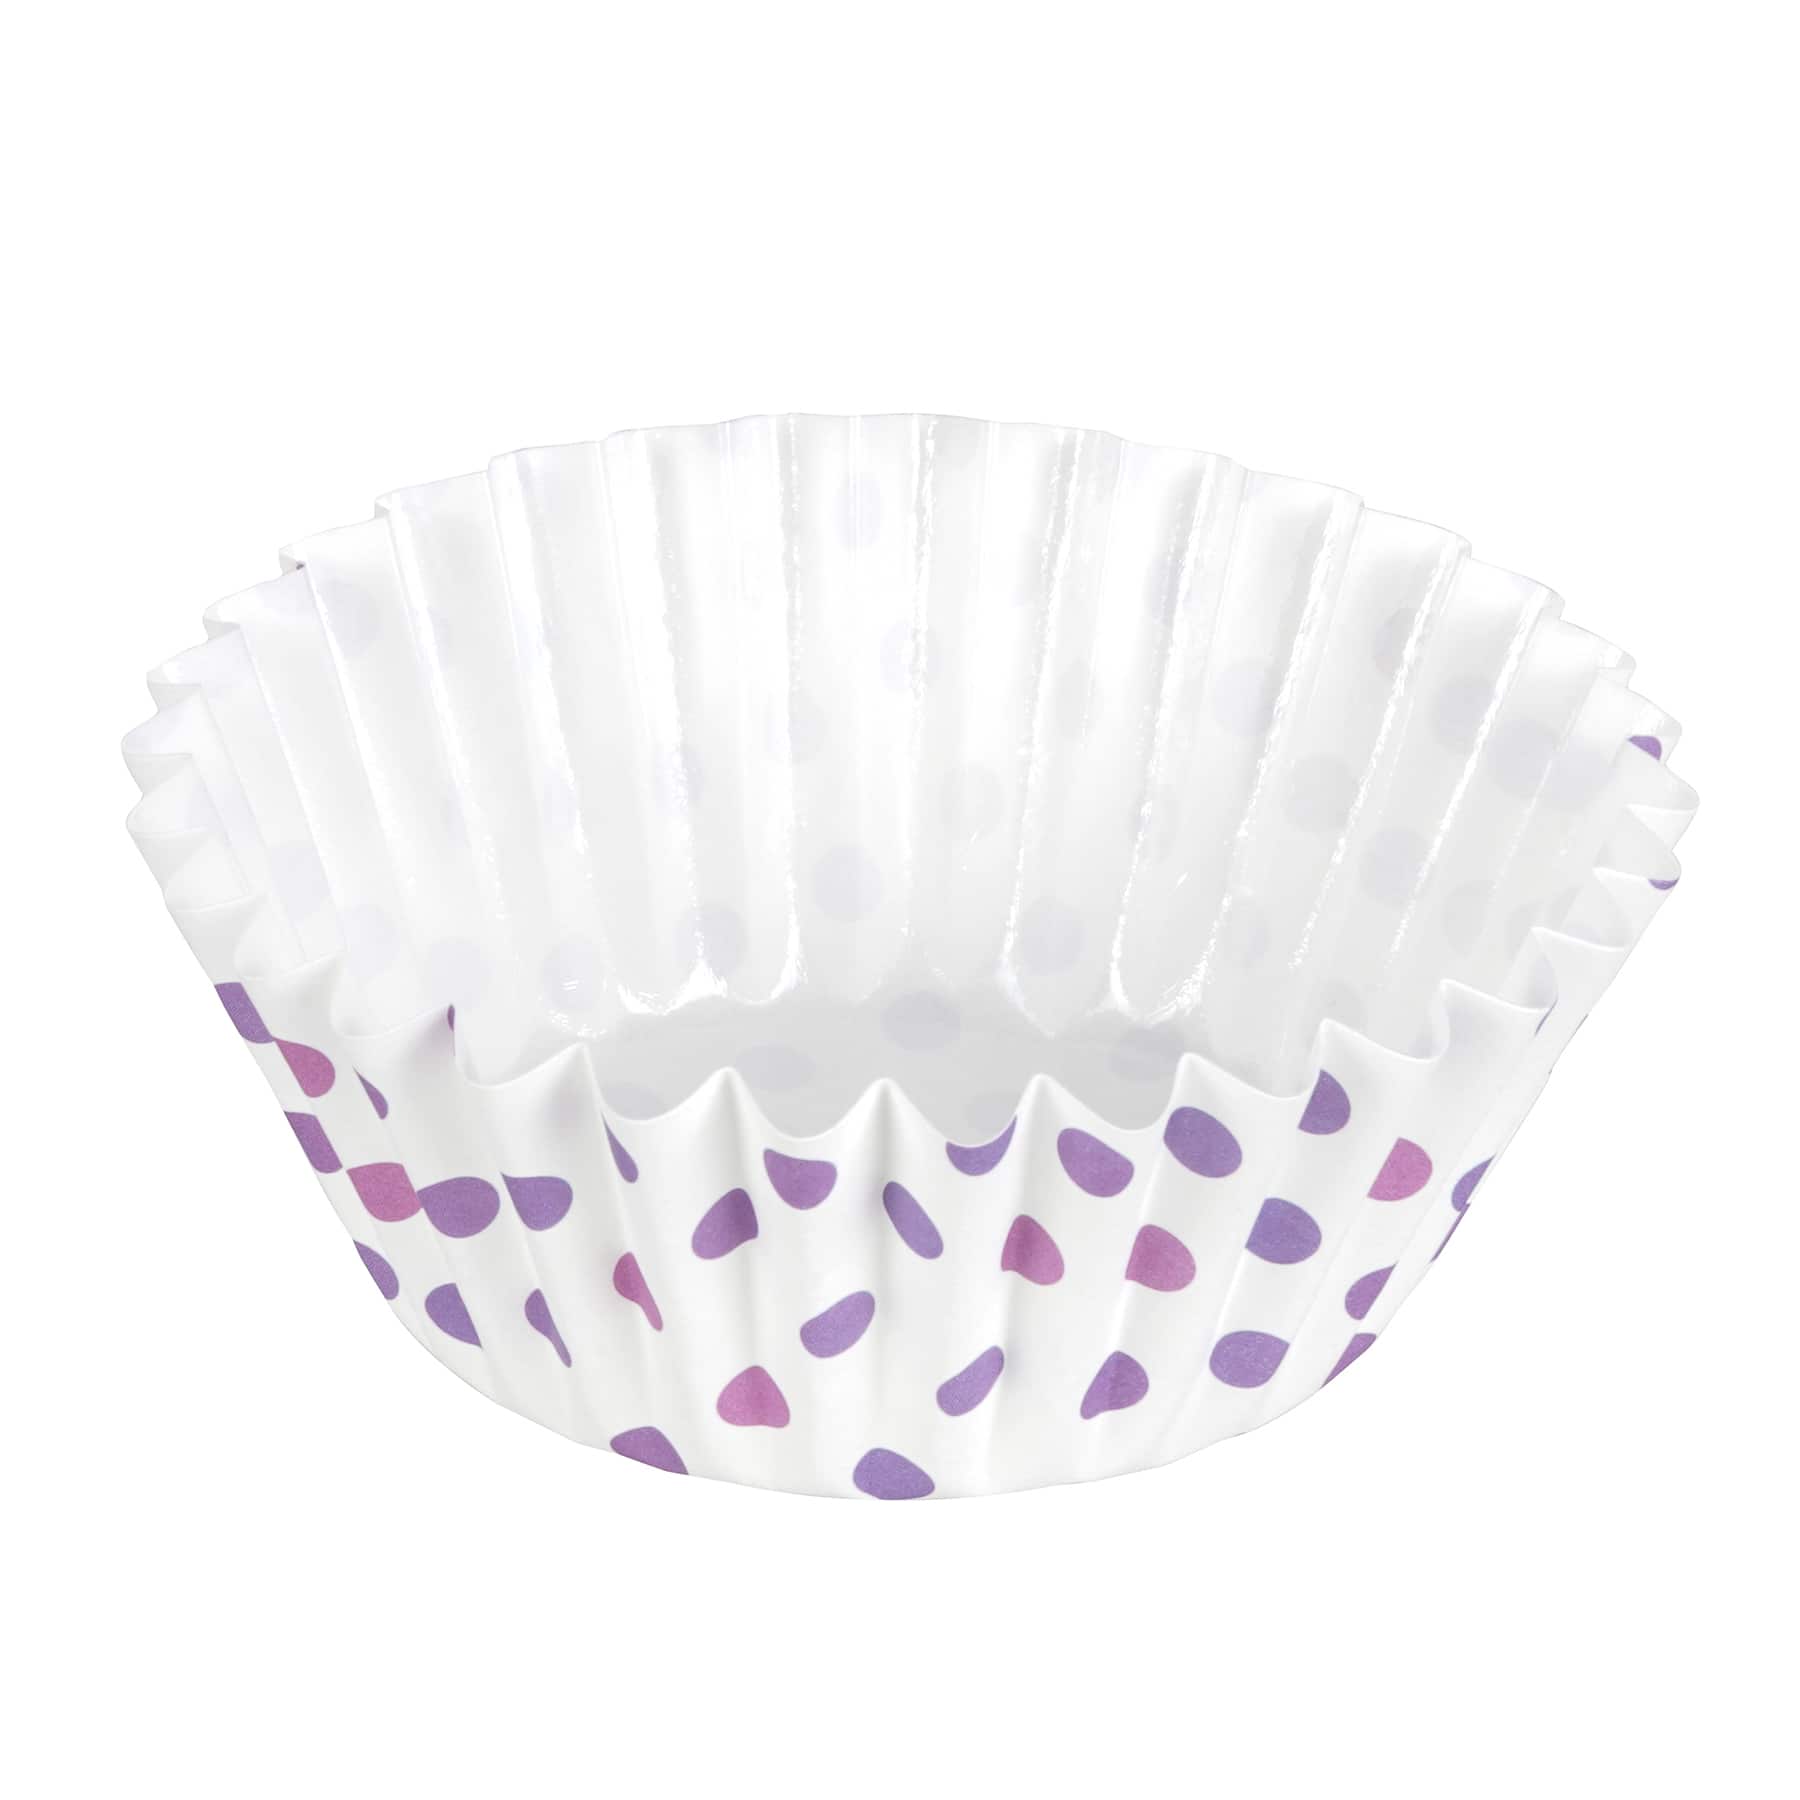 Reusable Silicone Baking Cups, Star Cupcake Liners (3 in., 12 Pack)